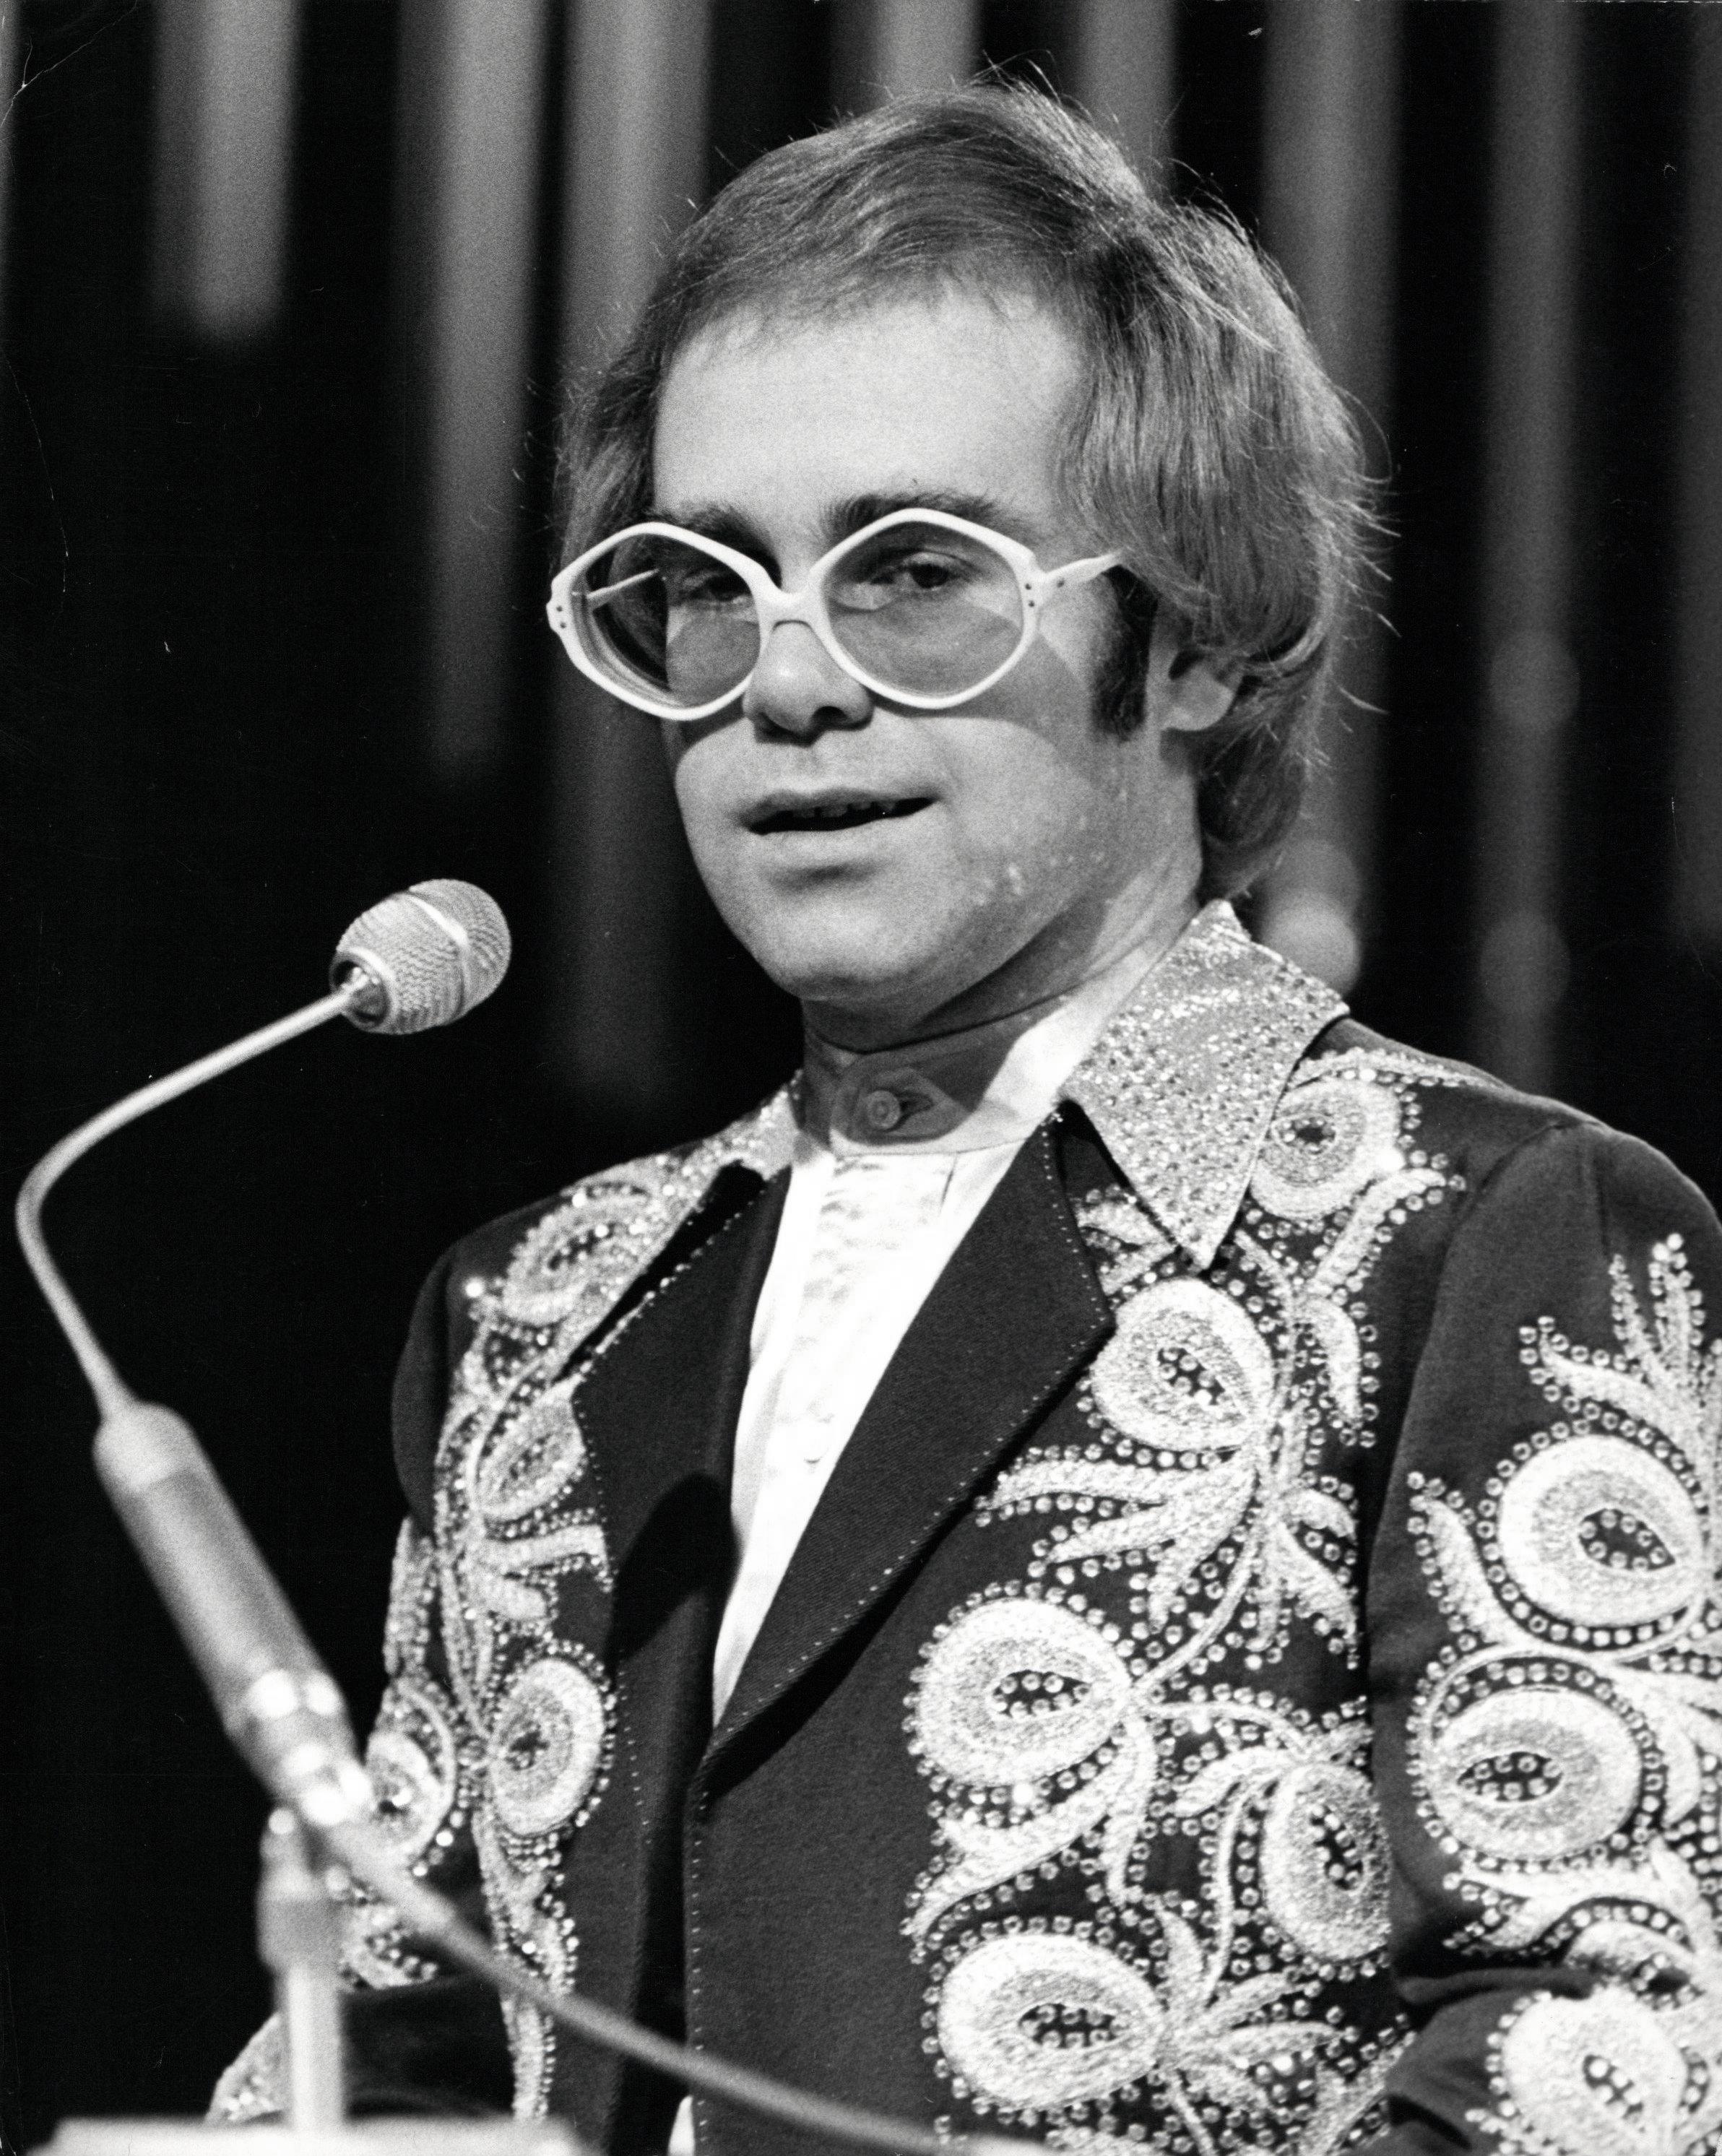 Unknown Black and White Photograph - Elton John on Top of the Pops Vintage Original Photograph